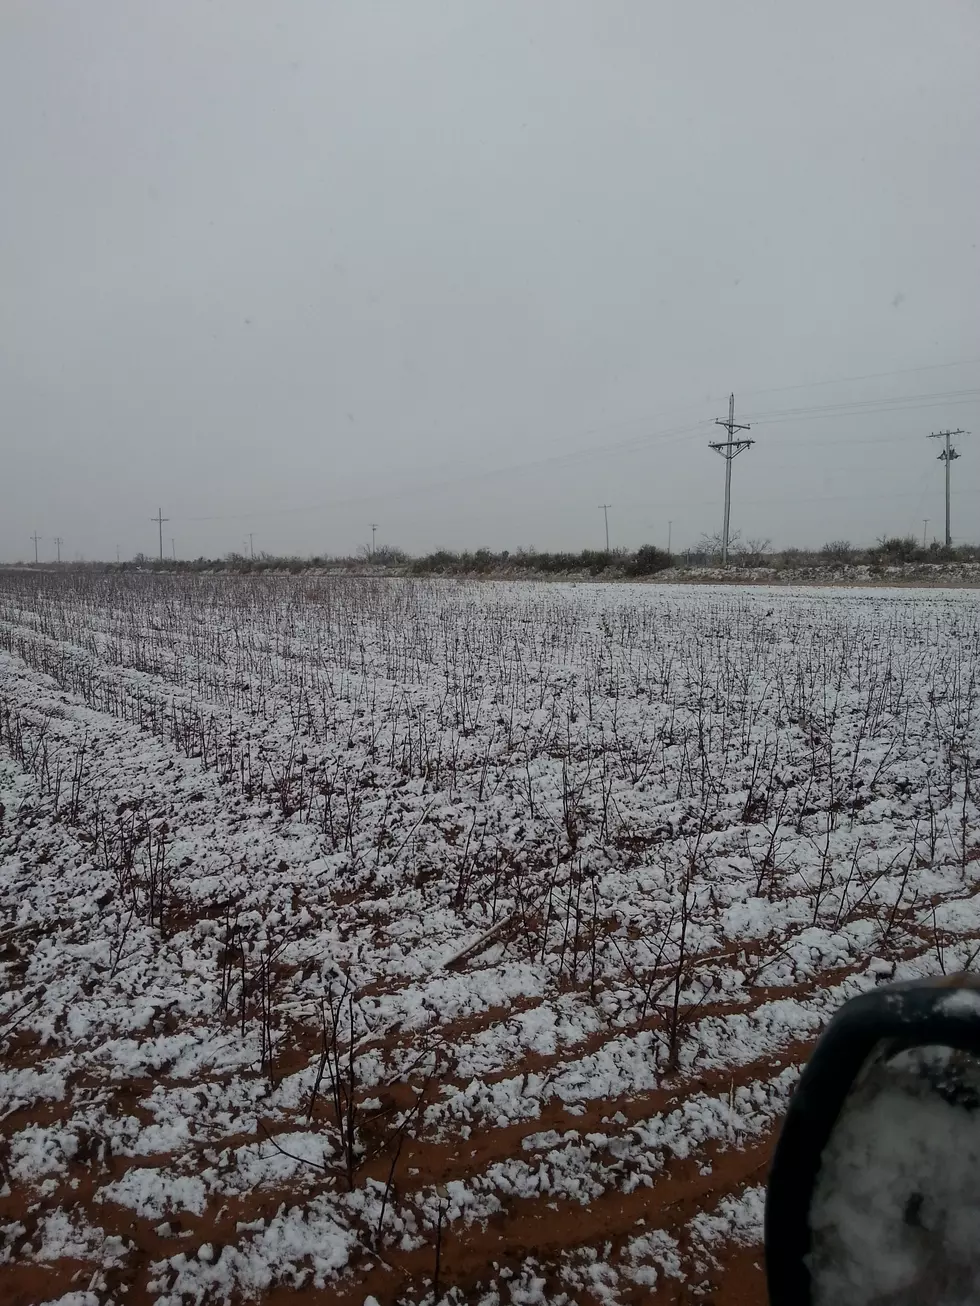 Snow Falls in West Texas on April 1